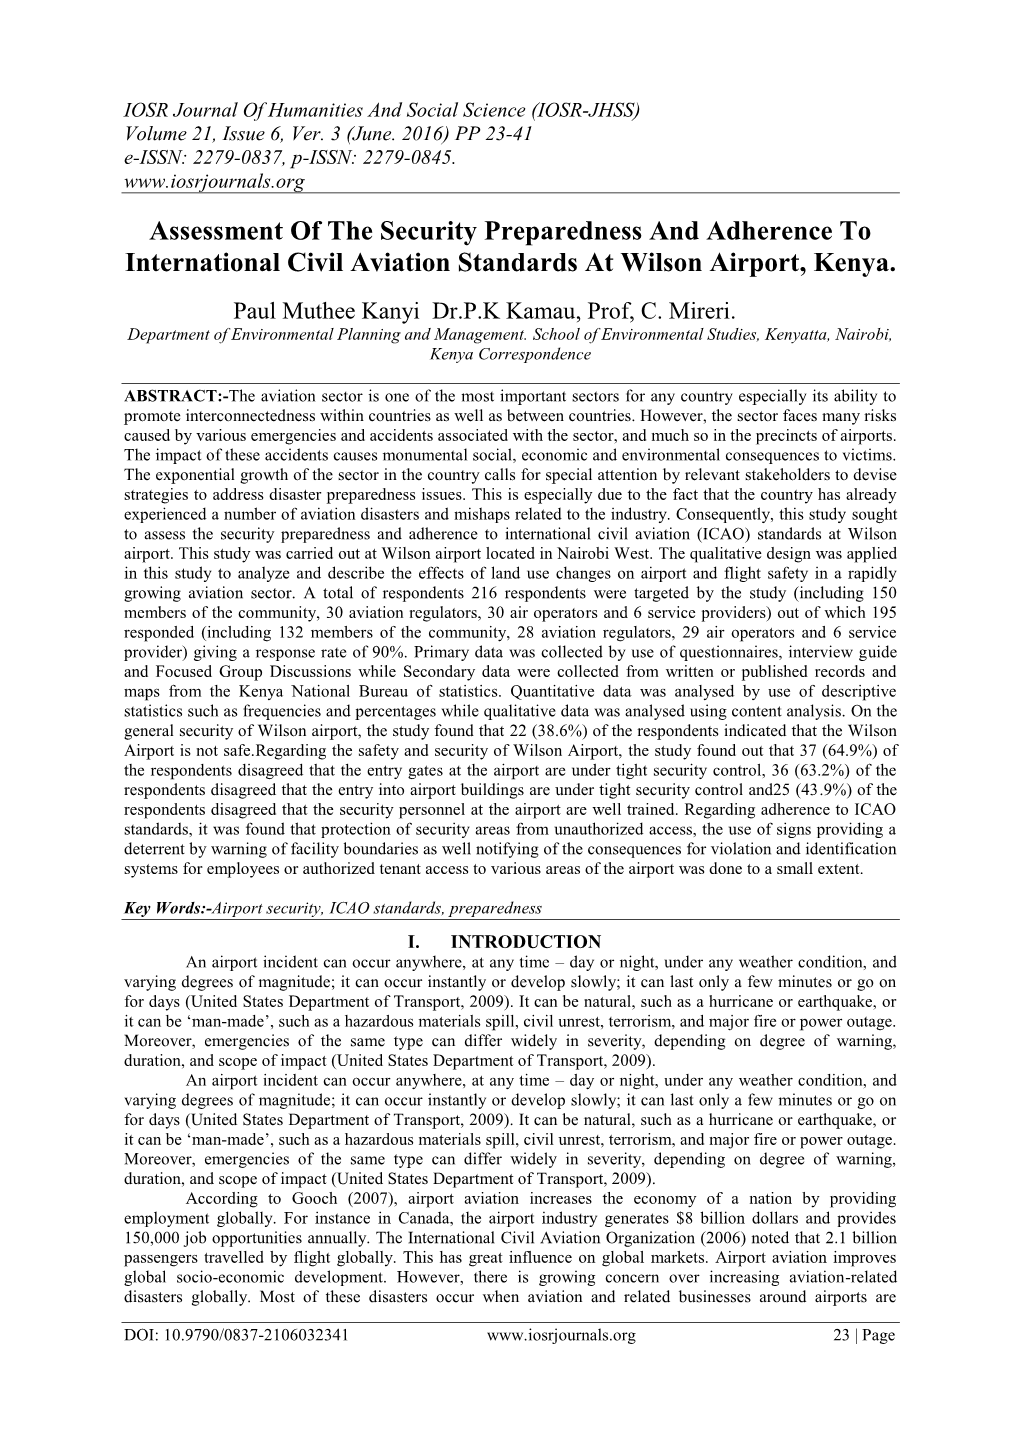 Assessment of the Security Preparedness and Adherence to International Civil Aviation Standards at Wilson Airport, Kenya